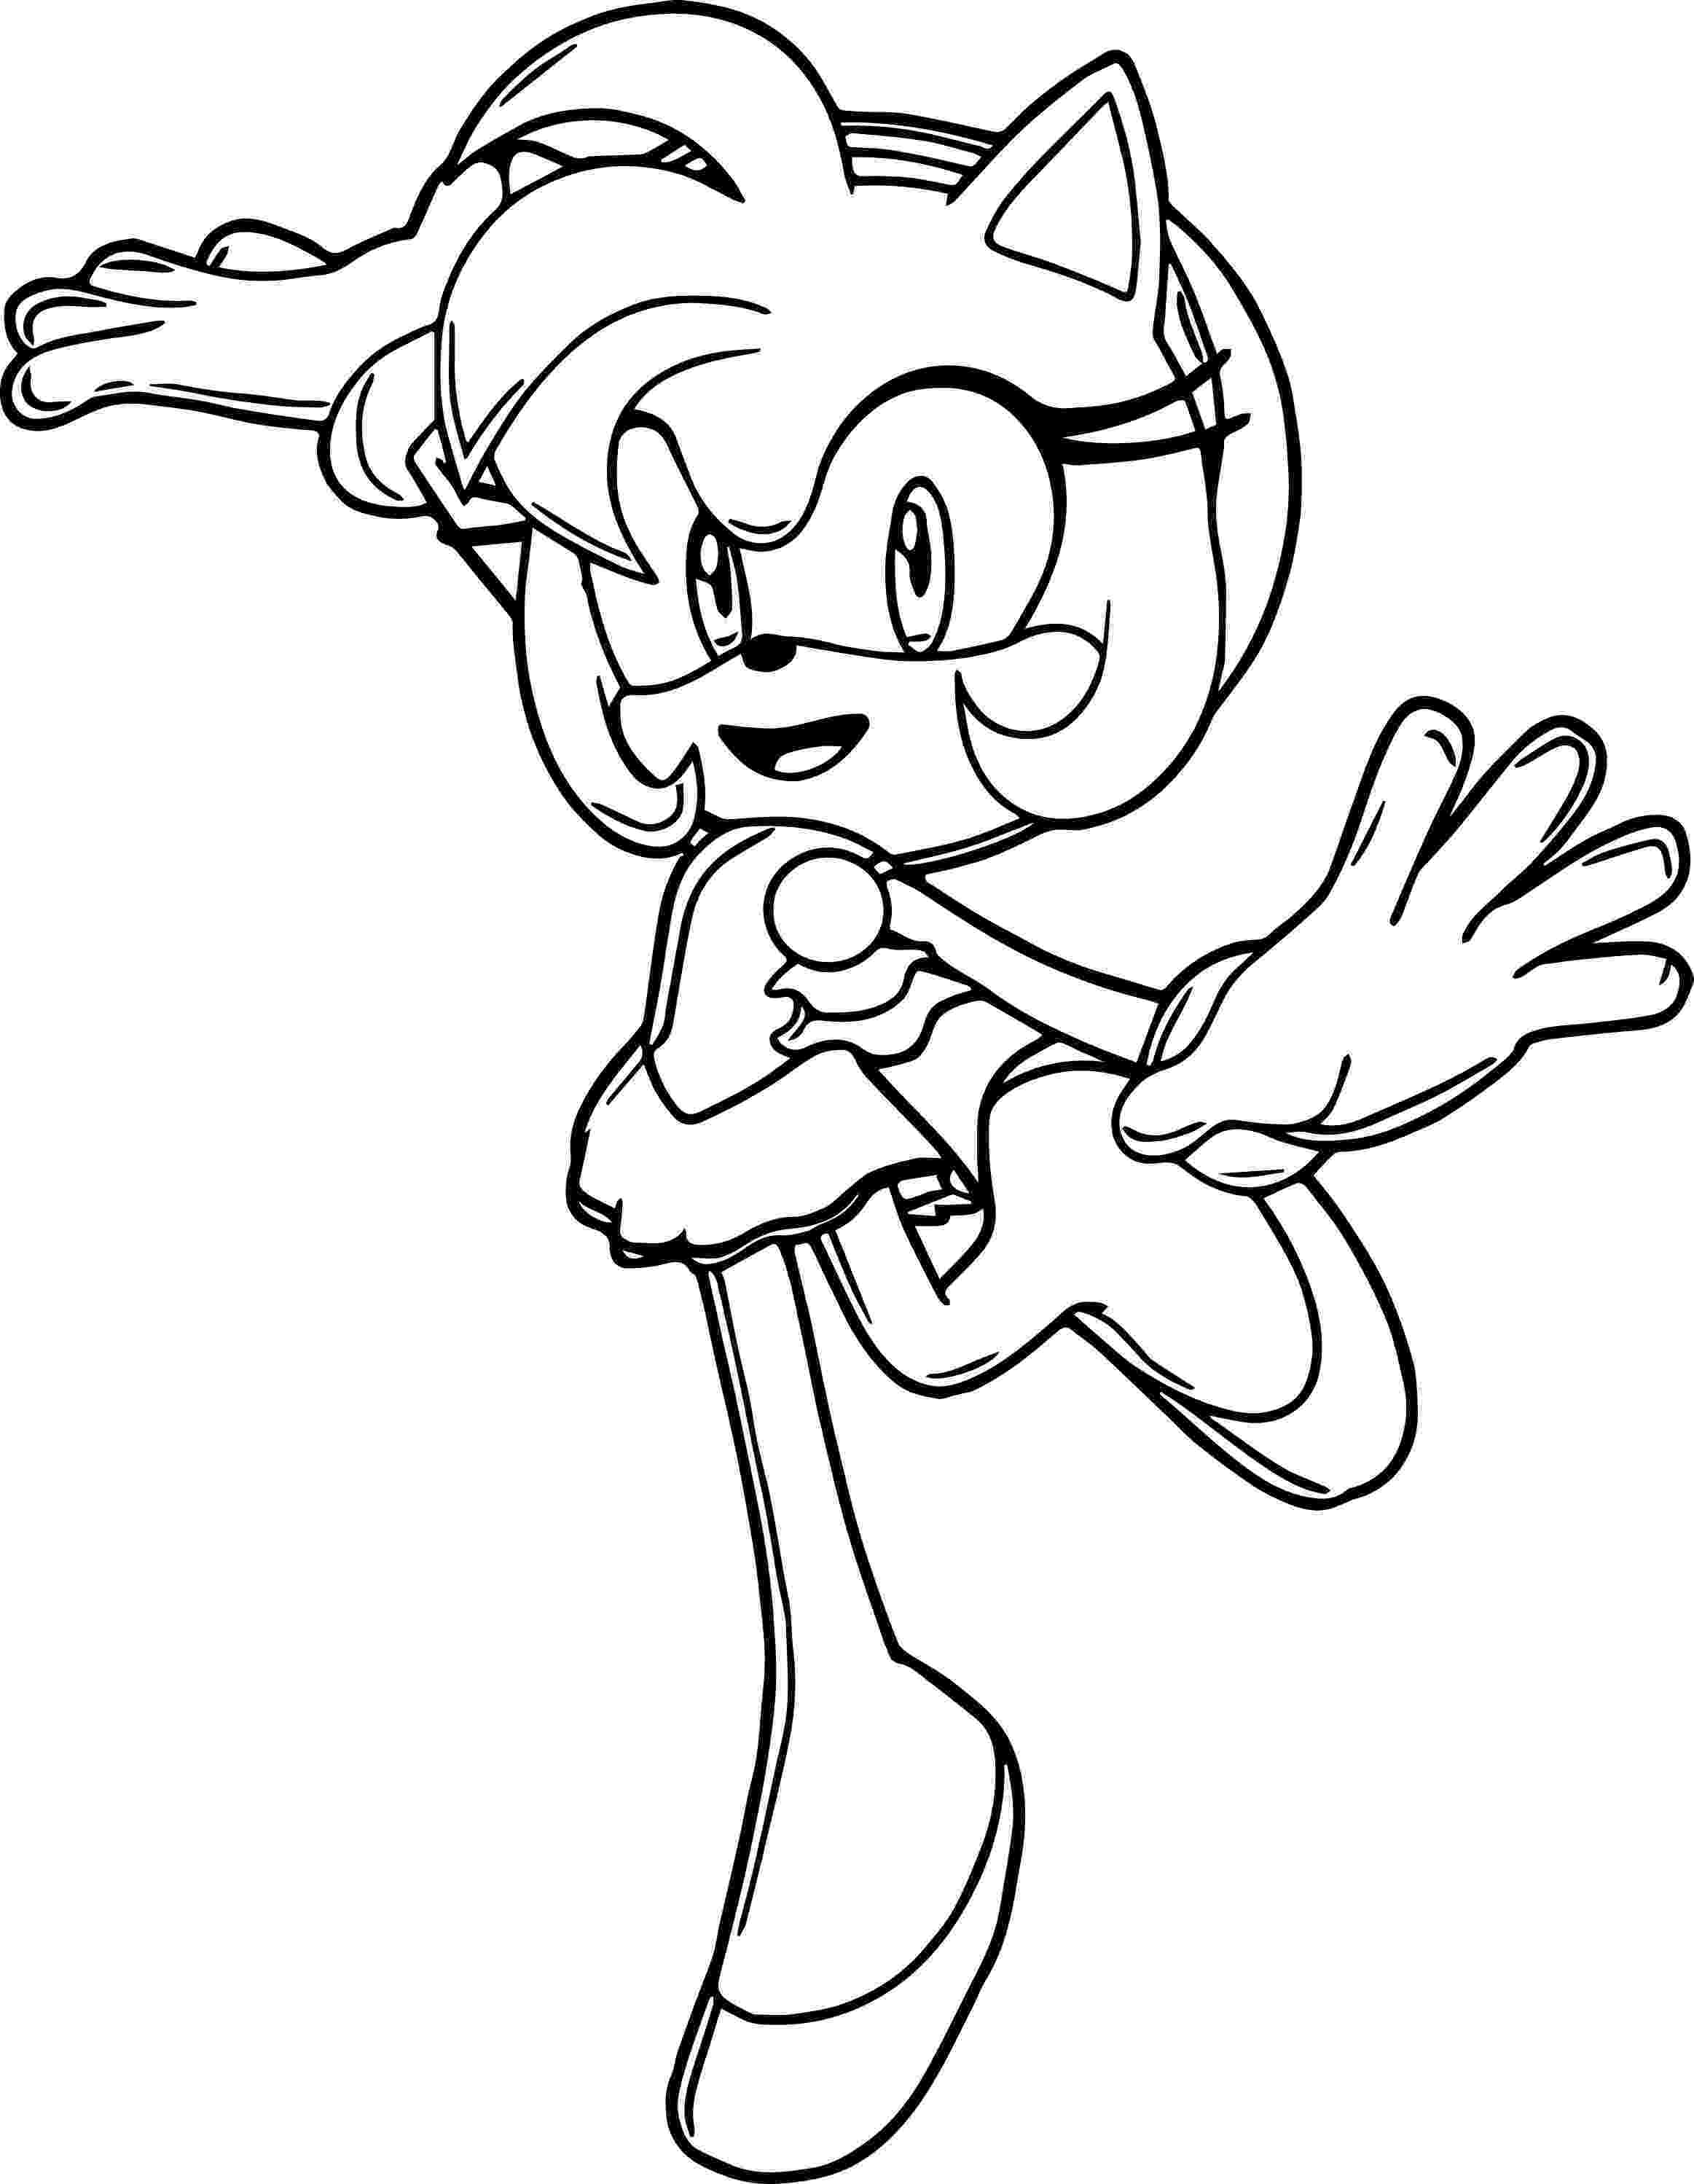 amy rose coloring pages amy rose tennis player coloring page wecoloringpagecom coloring pages amy rose 